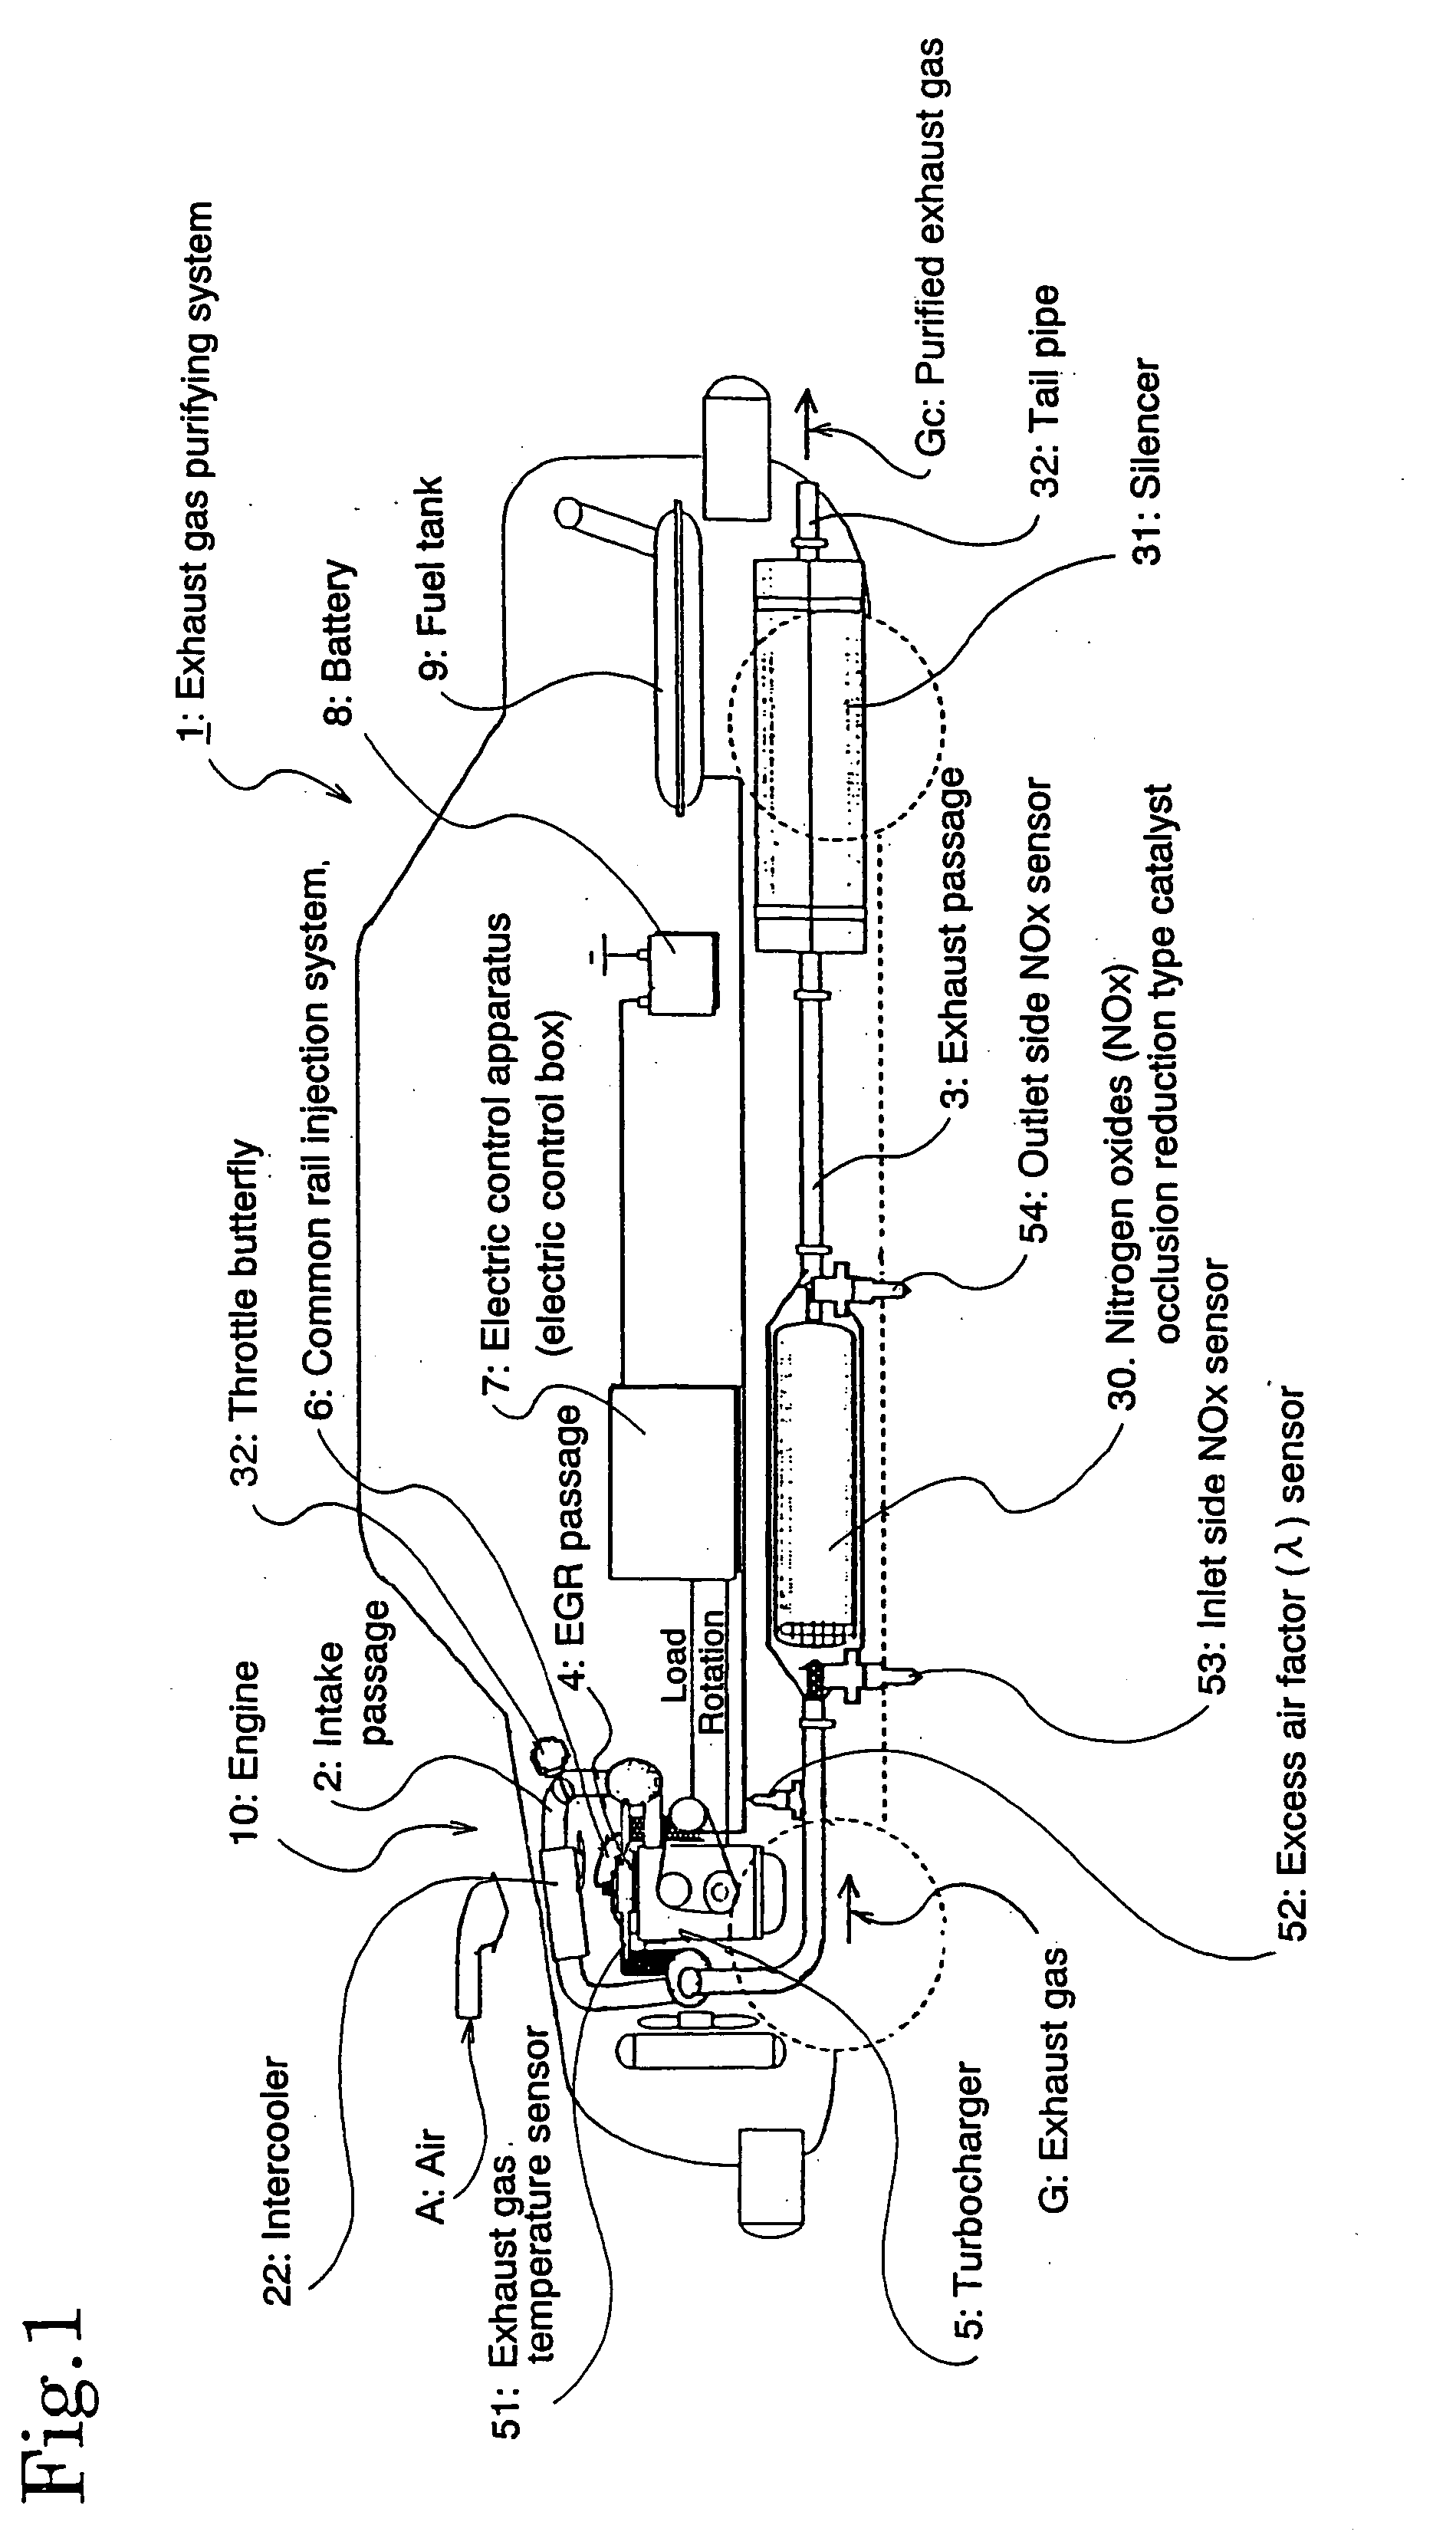 Exhaust gas decontamination system and method of exhaust gas decontamination